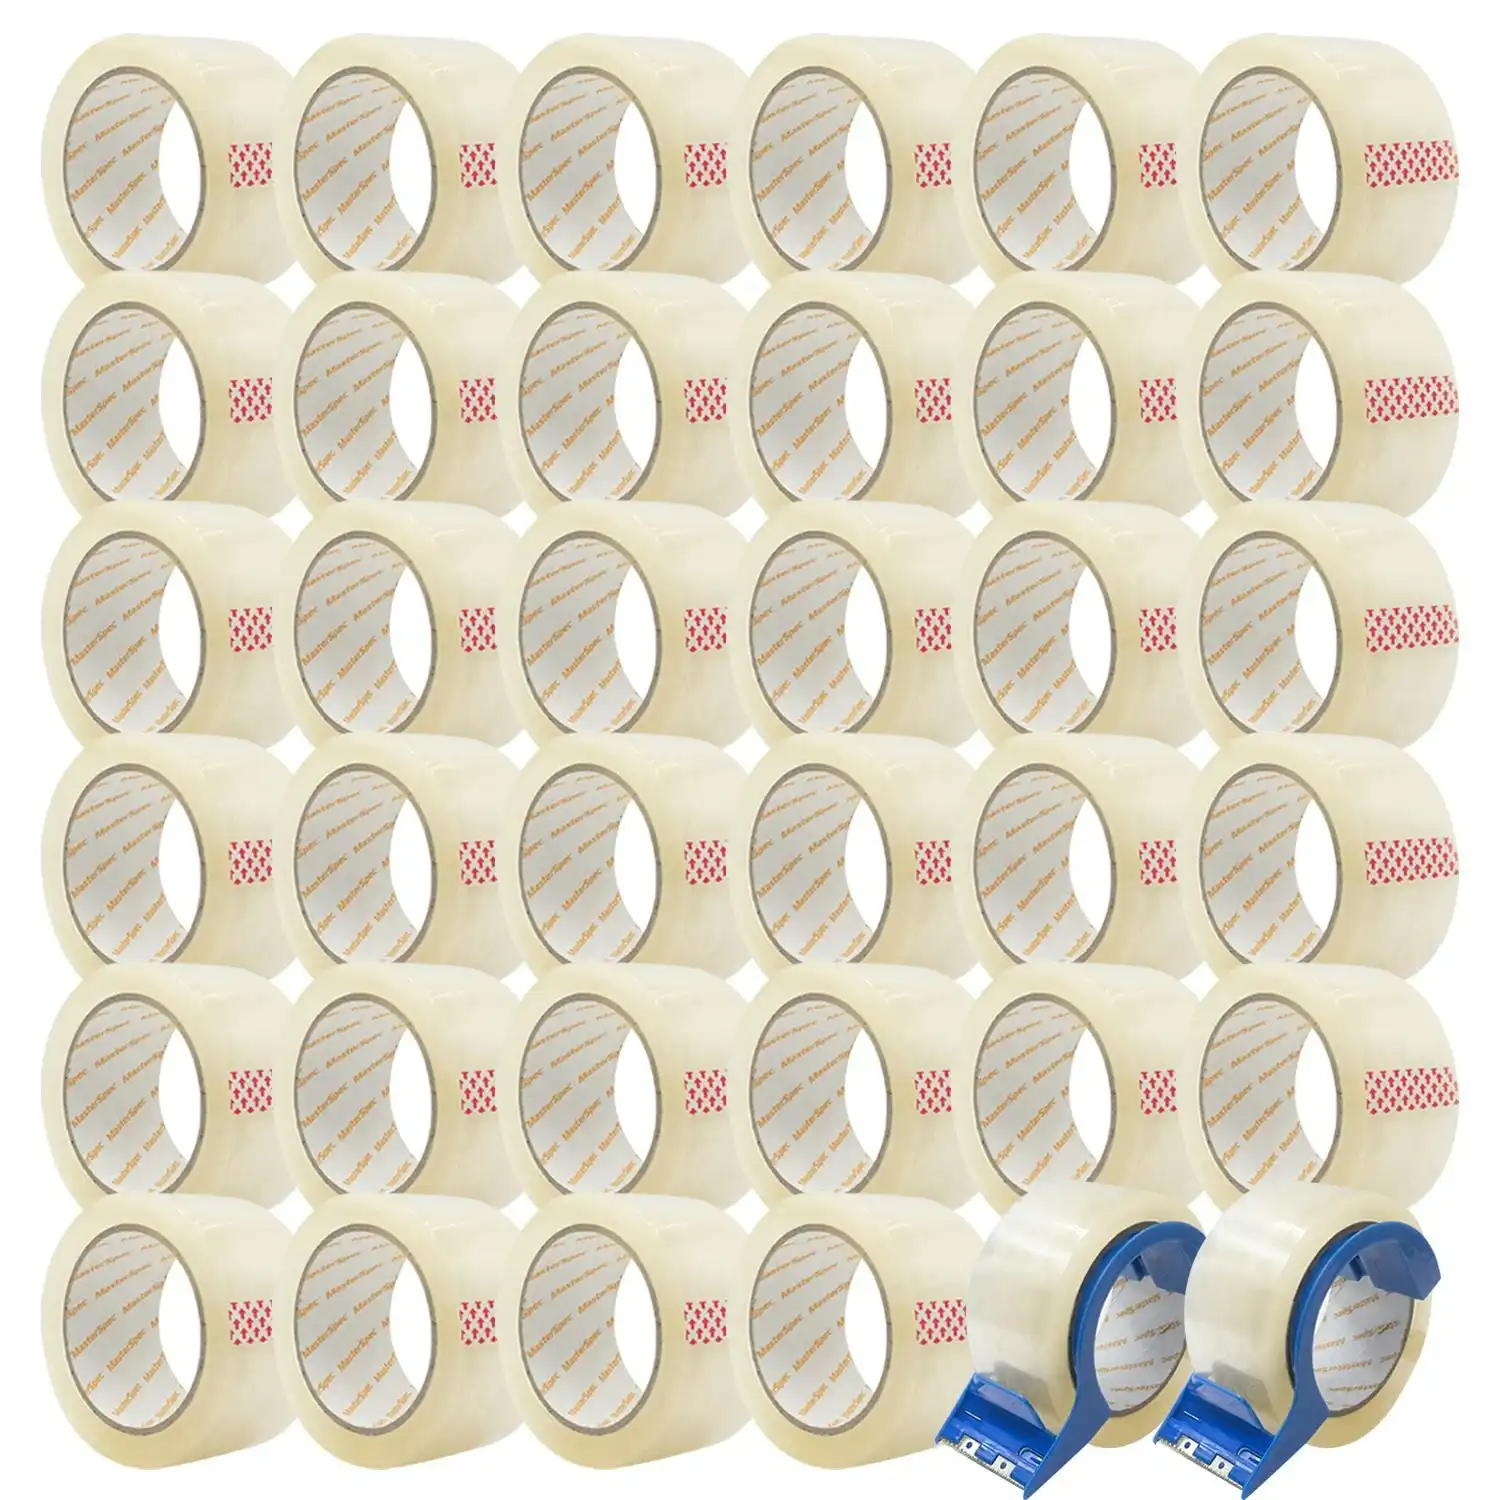 MasterSpec Clear Packing Tape - 36 Rolls w/ Cutters, 450m Total Length, 48mm x 75m